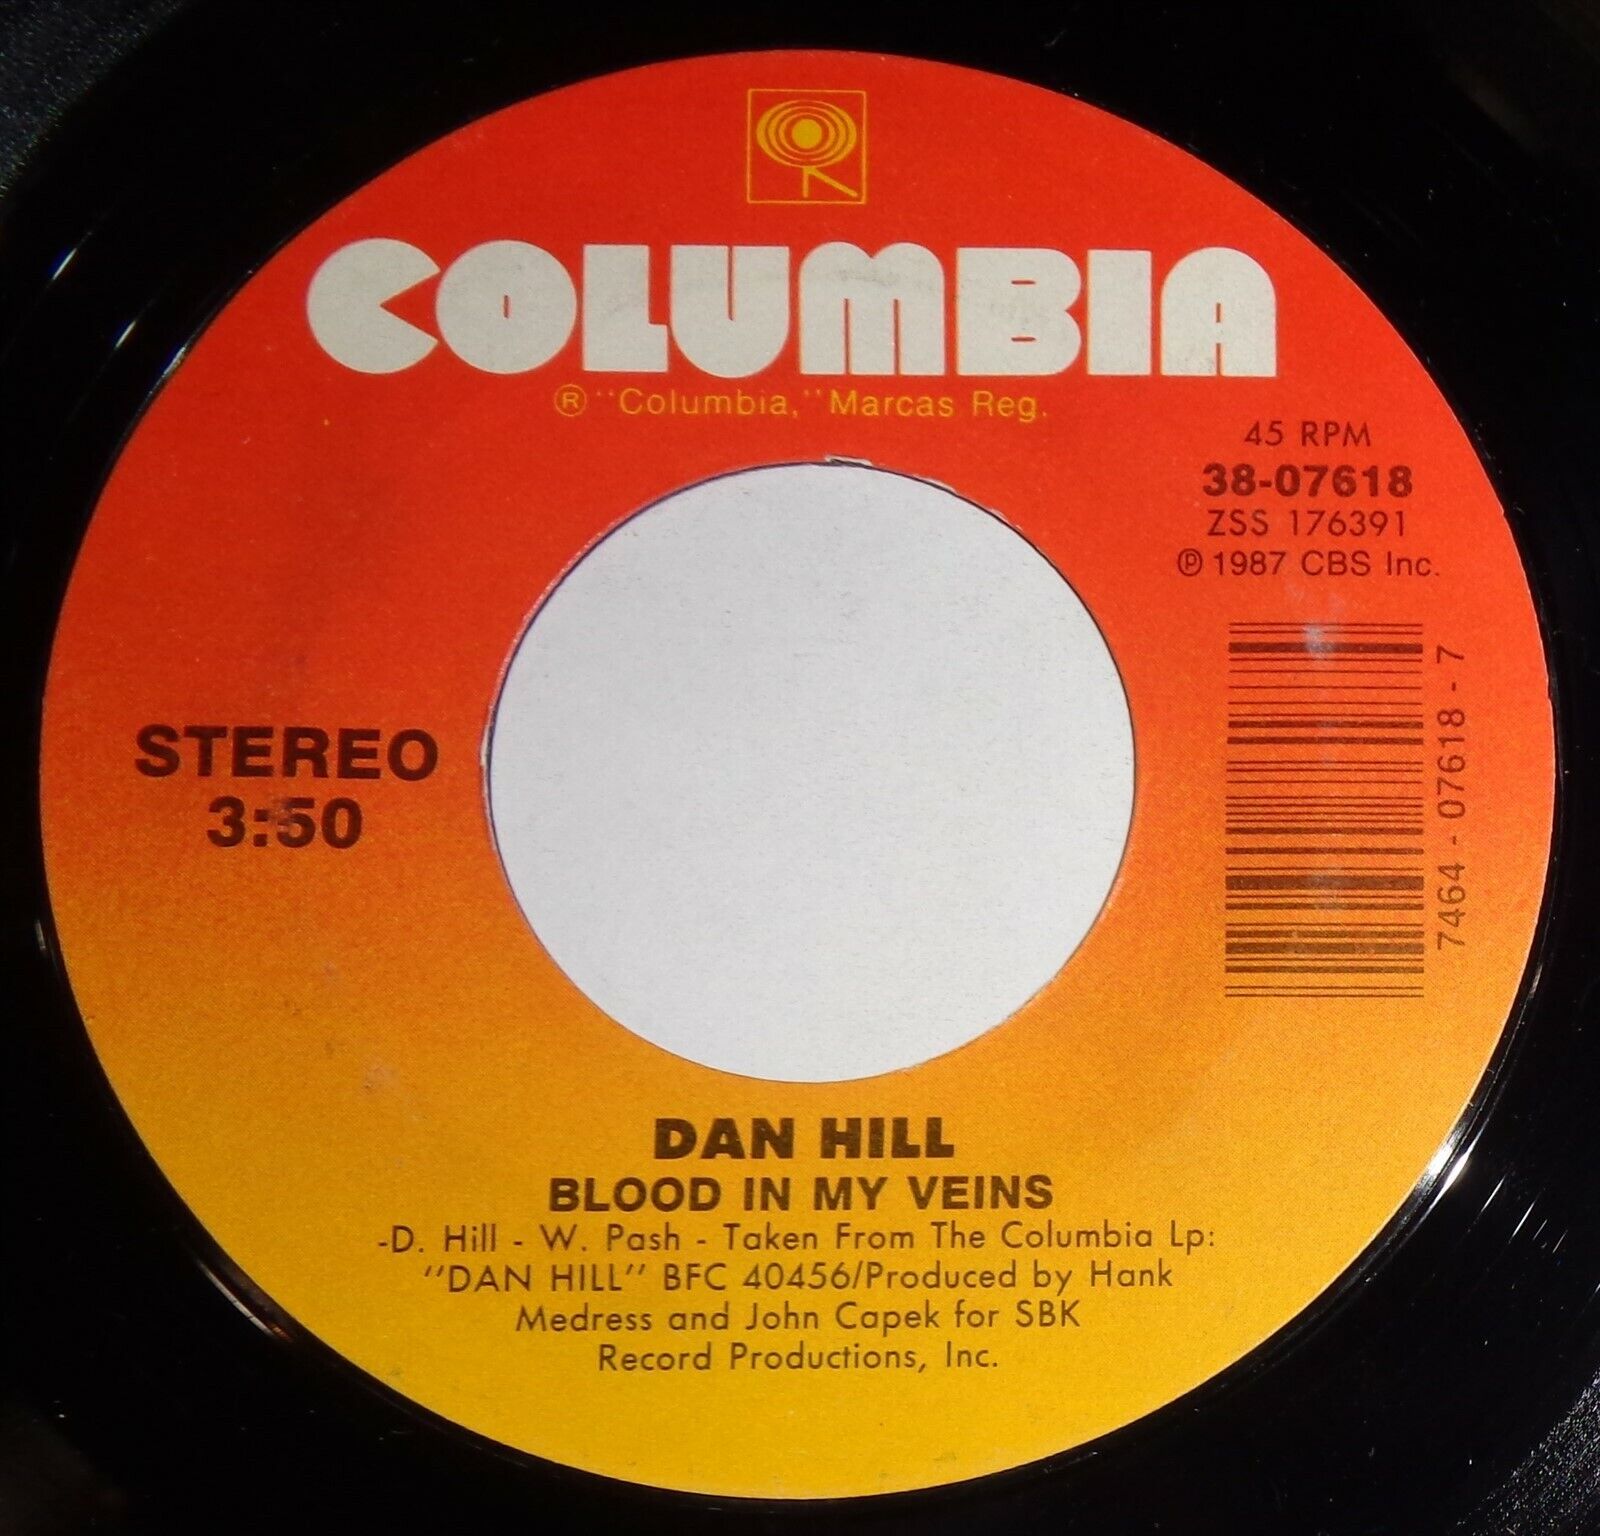 Dan Hill 45 RPM - Blood In My Veins / Never Thought NM VG++ / VG++ E9